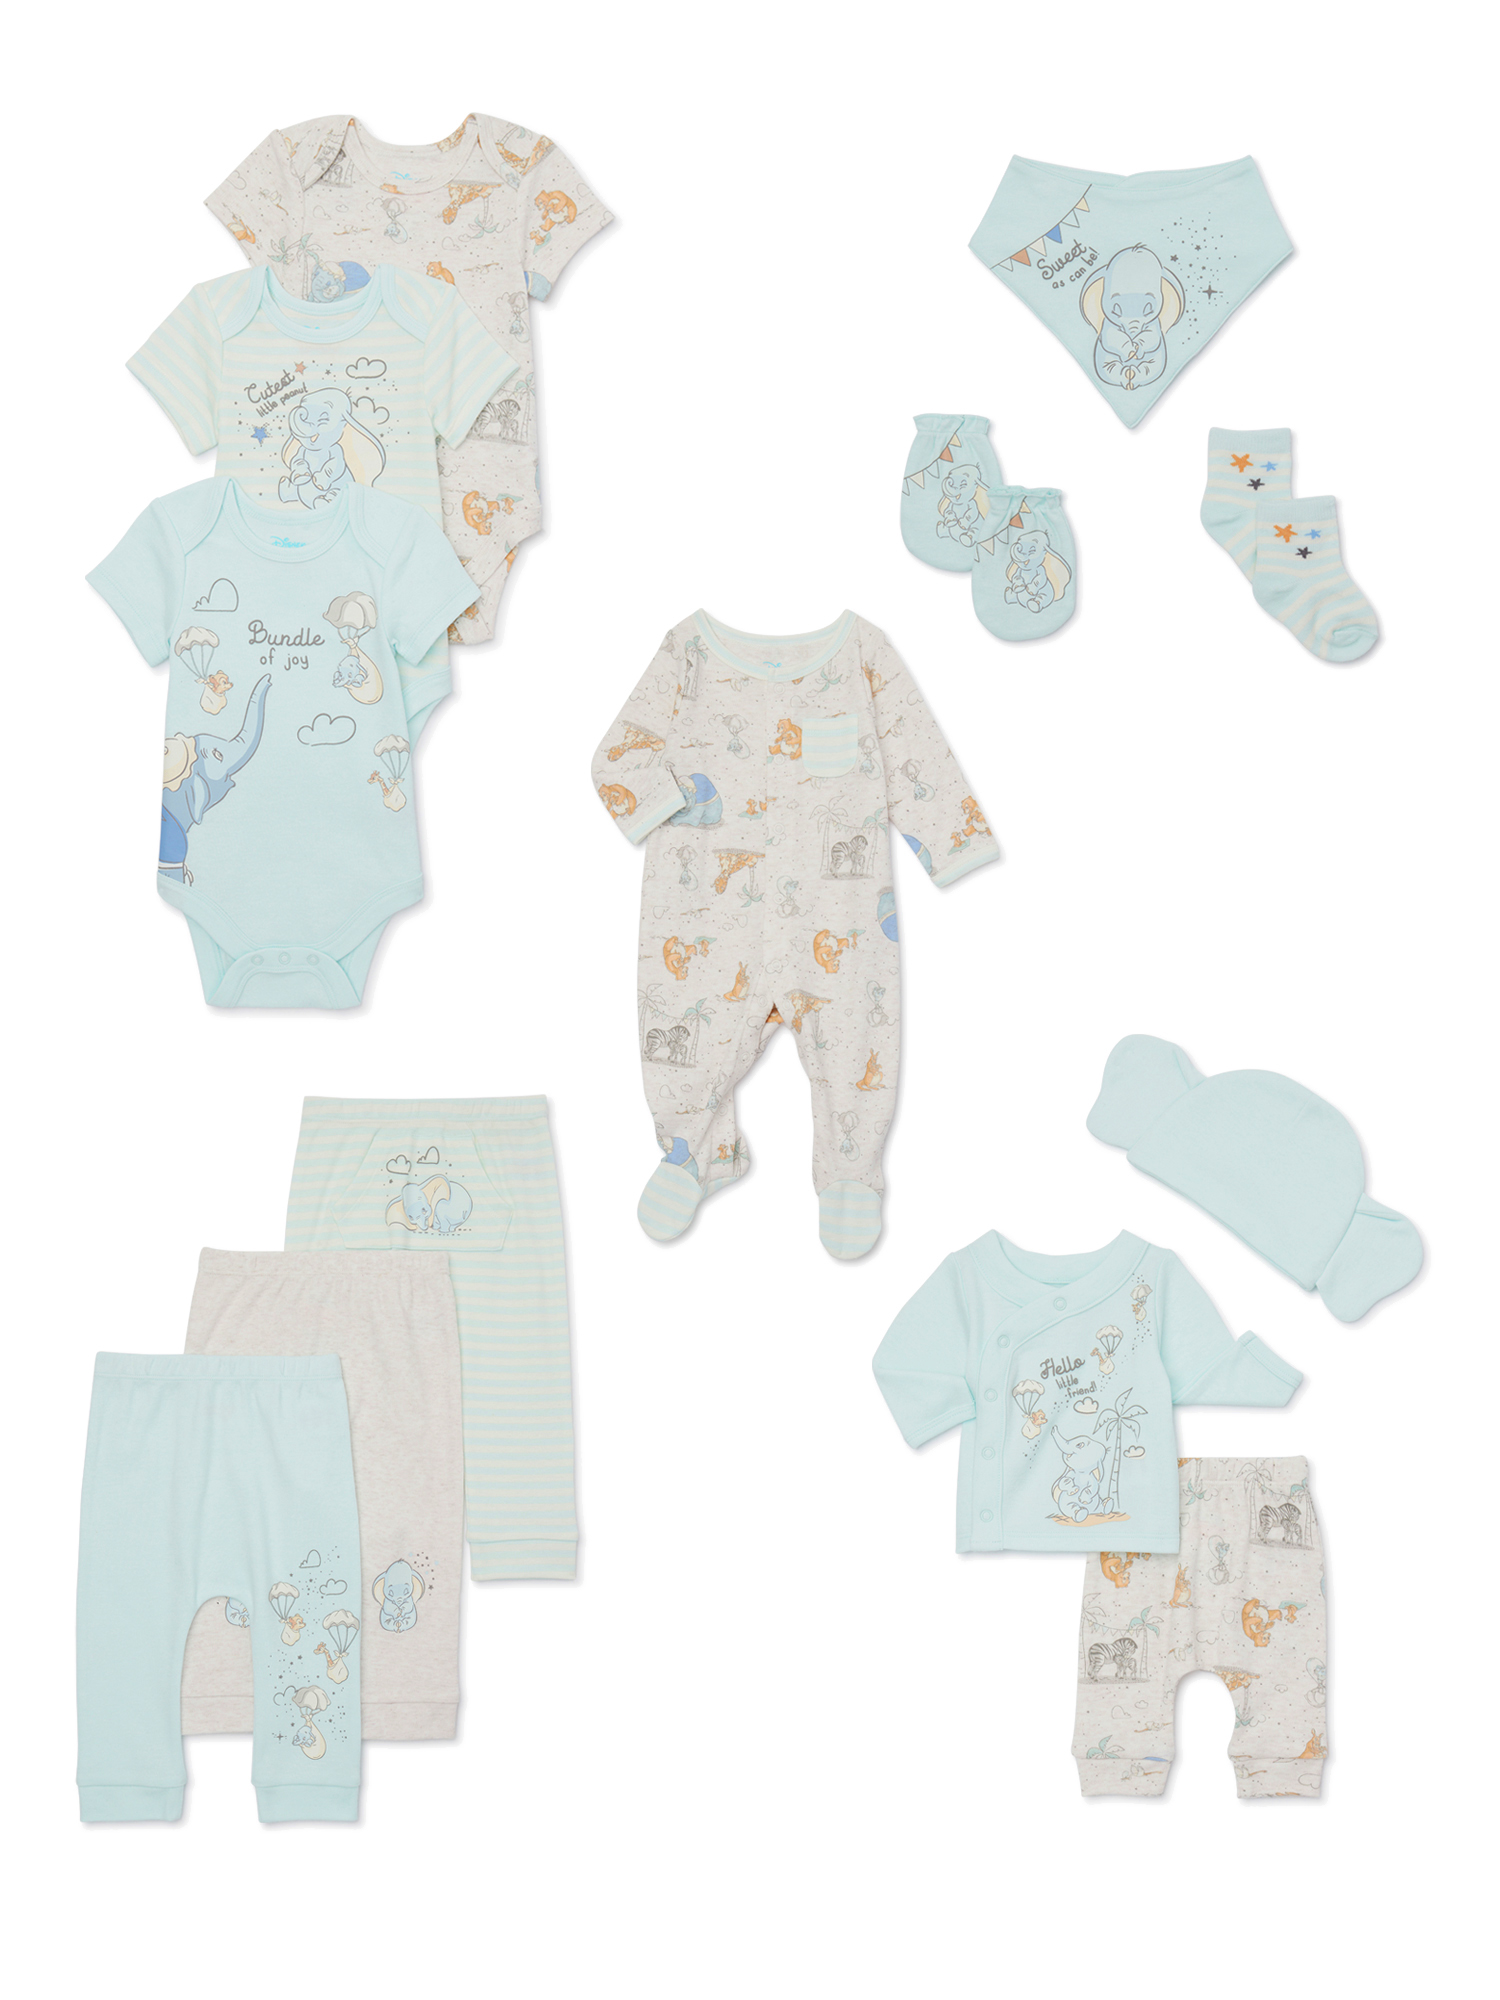 Disney Baby Wishes + Dreams Dumbo Layette Shower Gift Set Bundle, 13-Piece, Sizes NB-3/6M - image 1 of 12